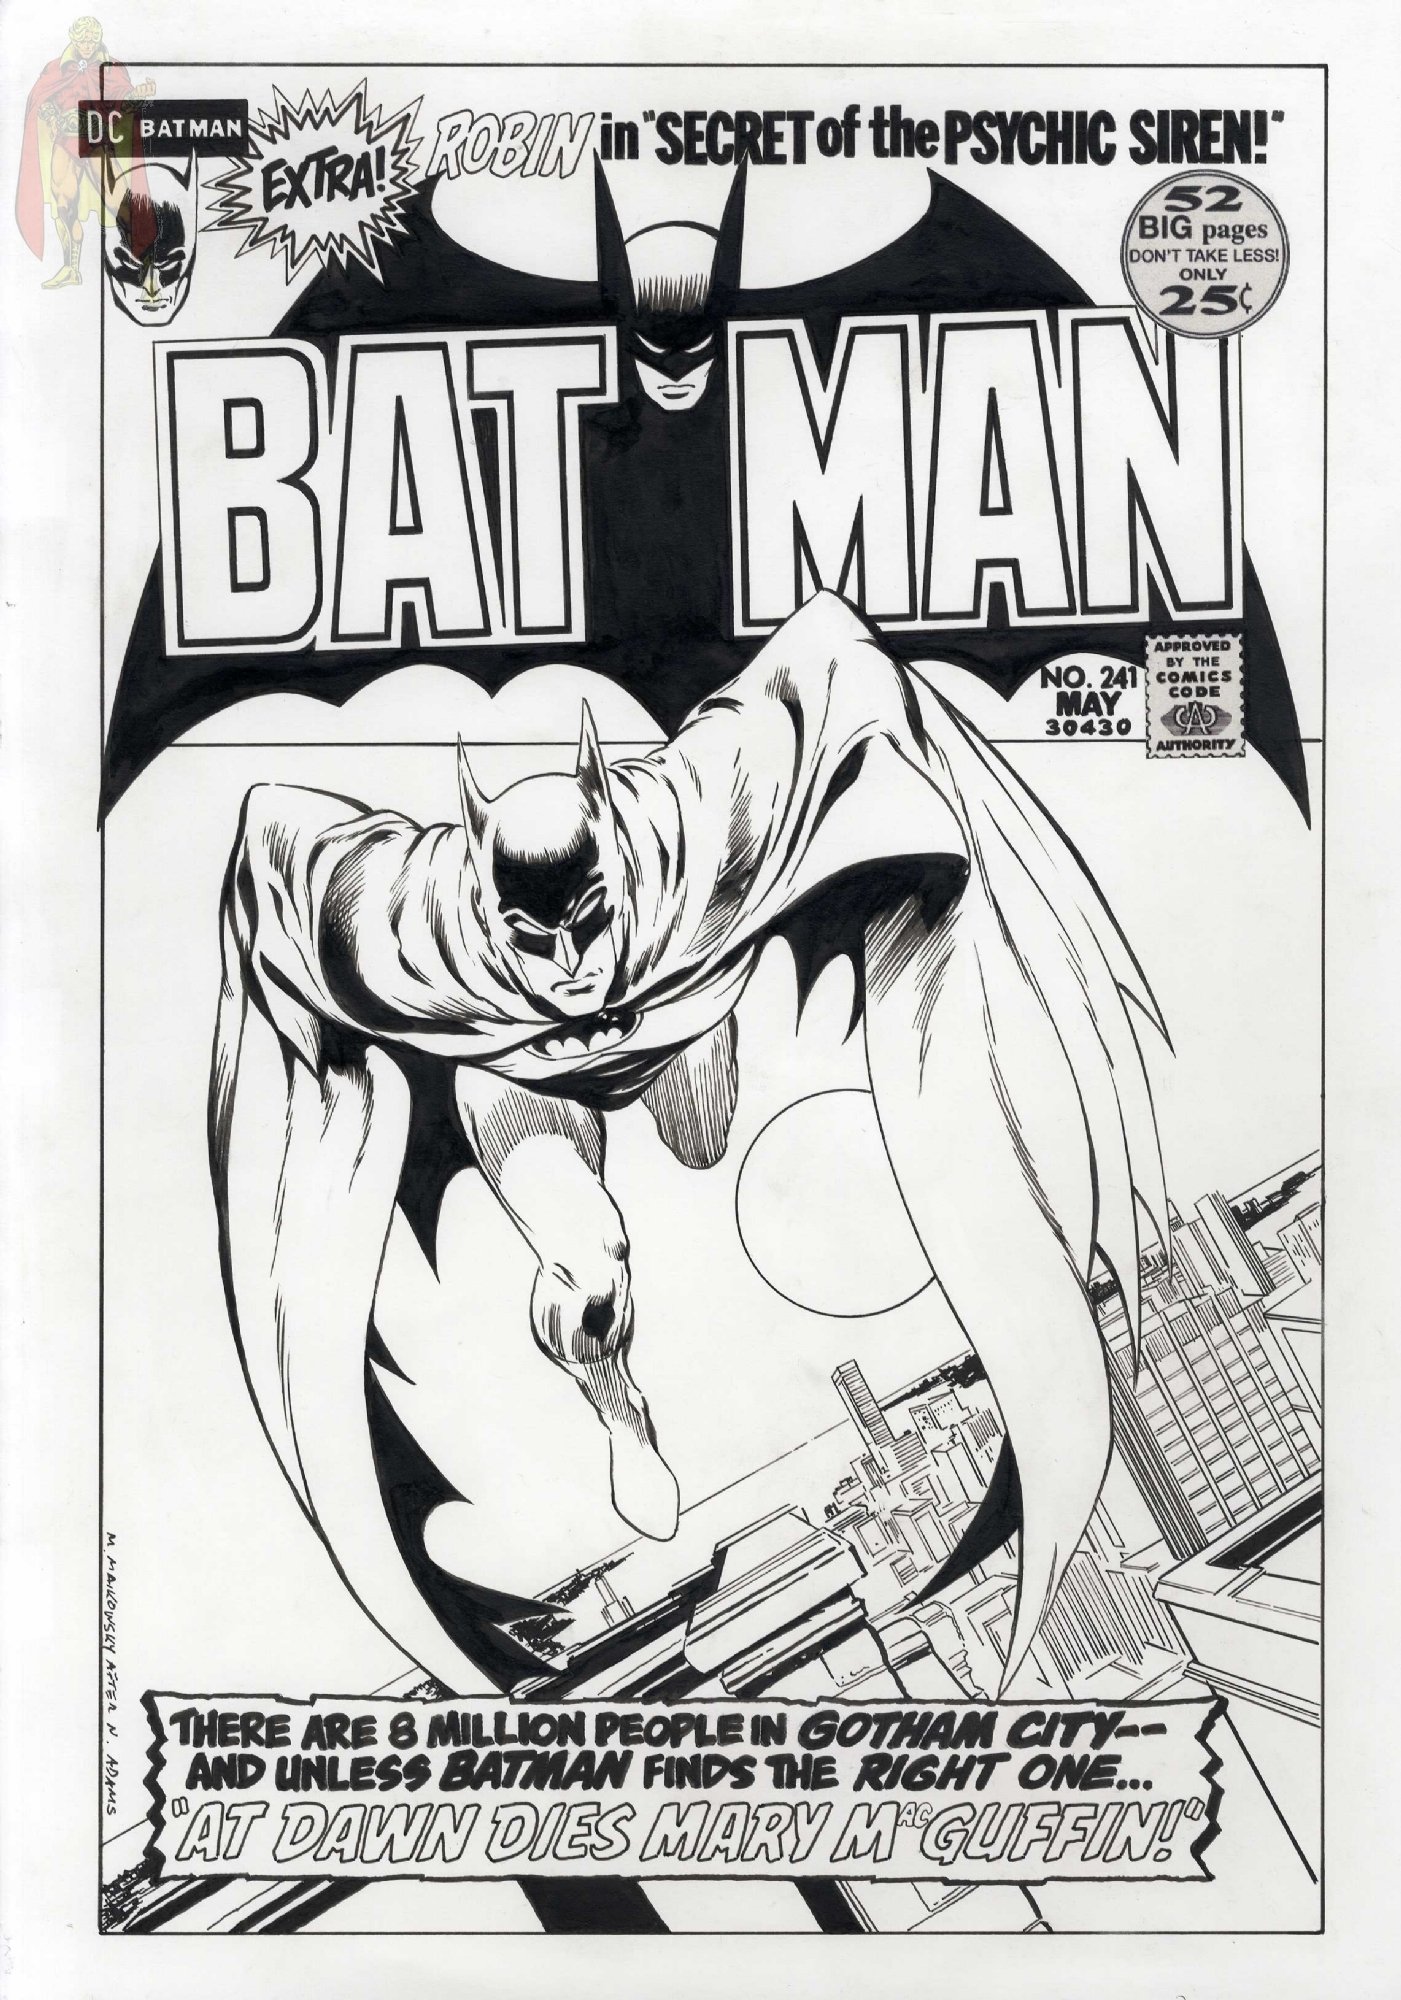 Batman issue 241 cover recreation by Michael Maikowsky after Neal Adams, in  Kirk Dilbeck (3-Wishes and Patron-of-art) 's 3-Wishes presents: Michael  Maikowsky-SOLD Gallery Comic Art Gallery Room